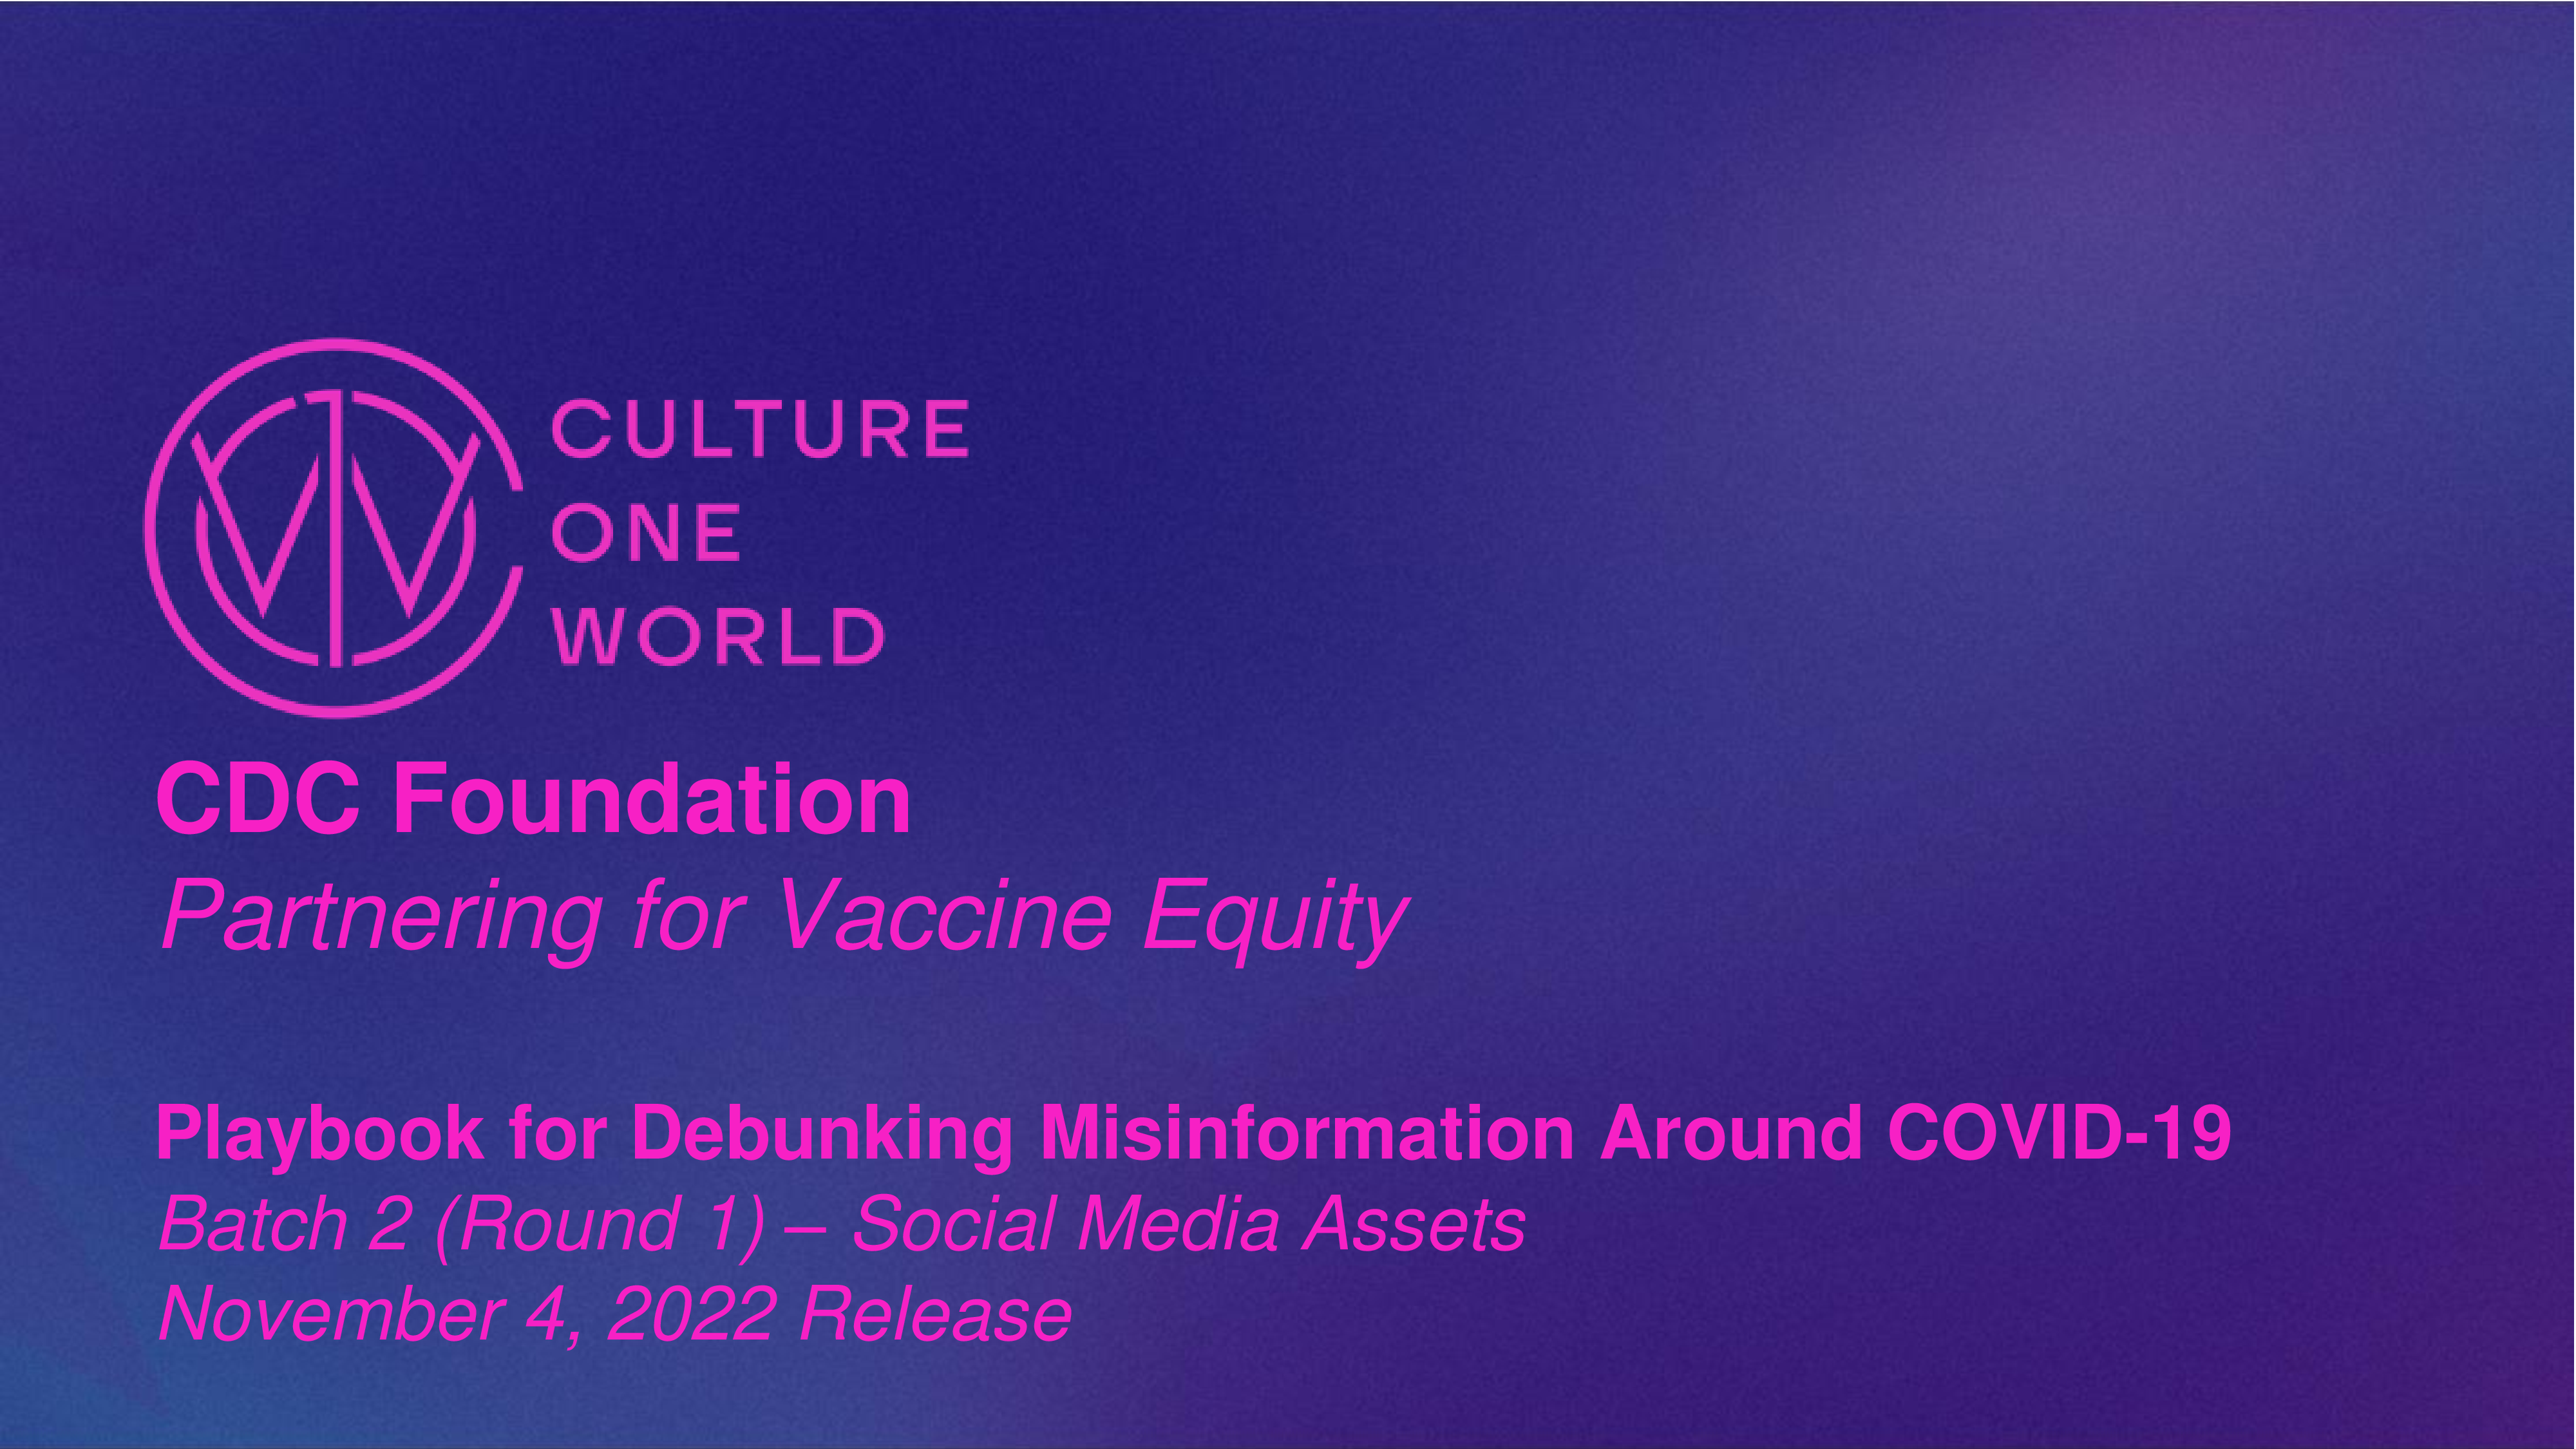 First page of playbook with pink text on a dark purple background with the Culture One World logo at the top left corner.